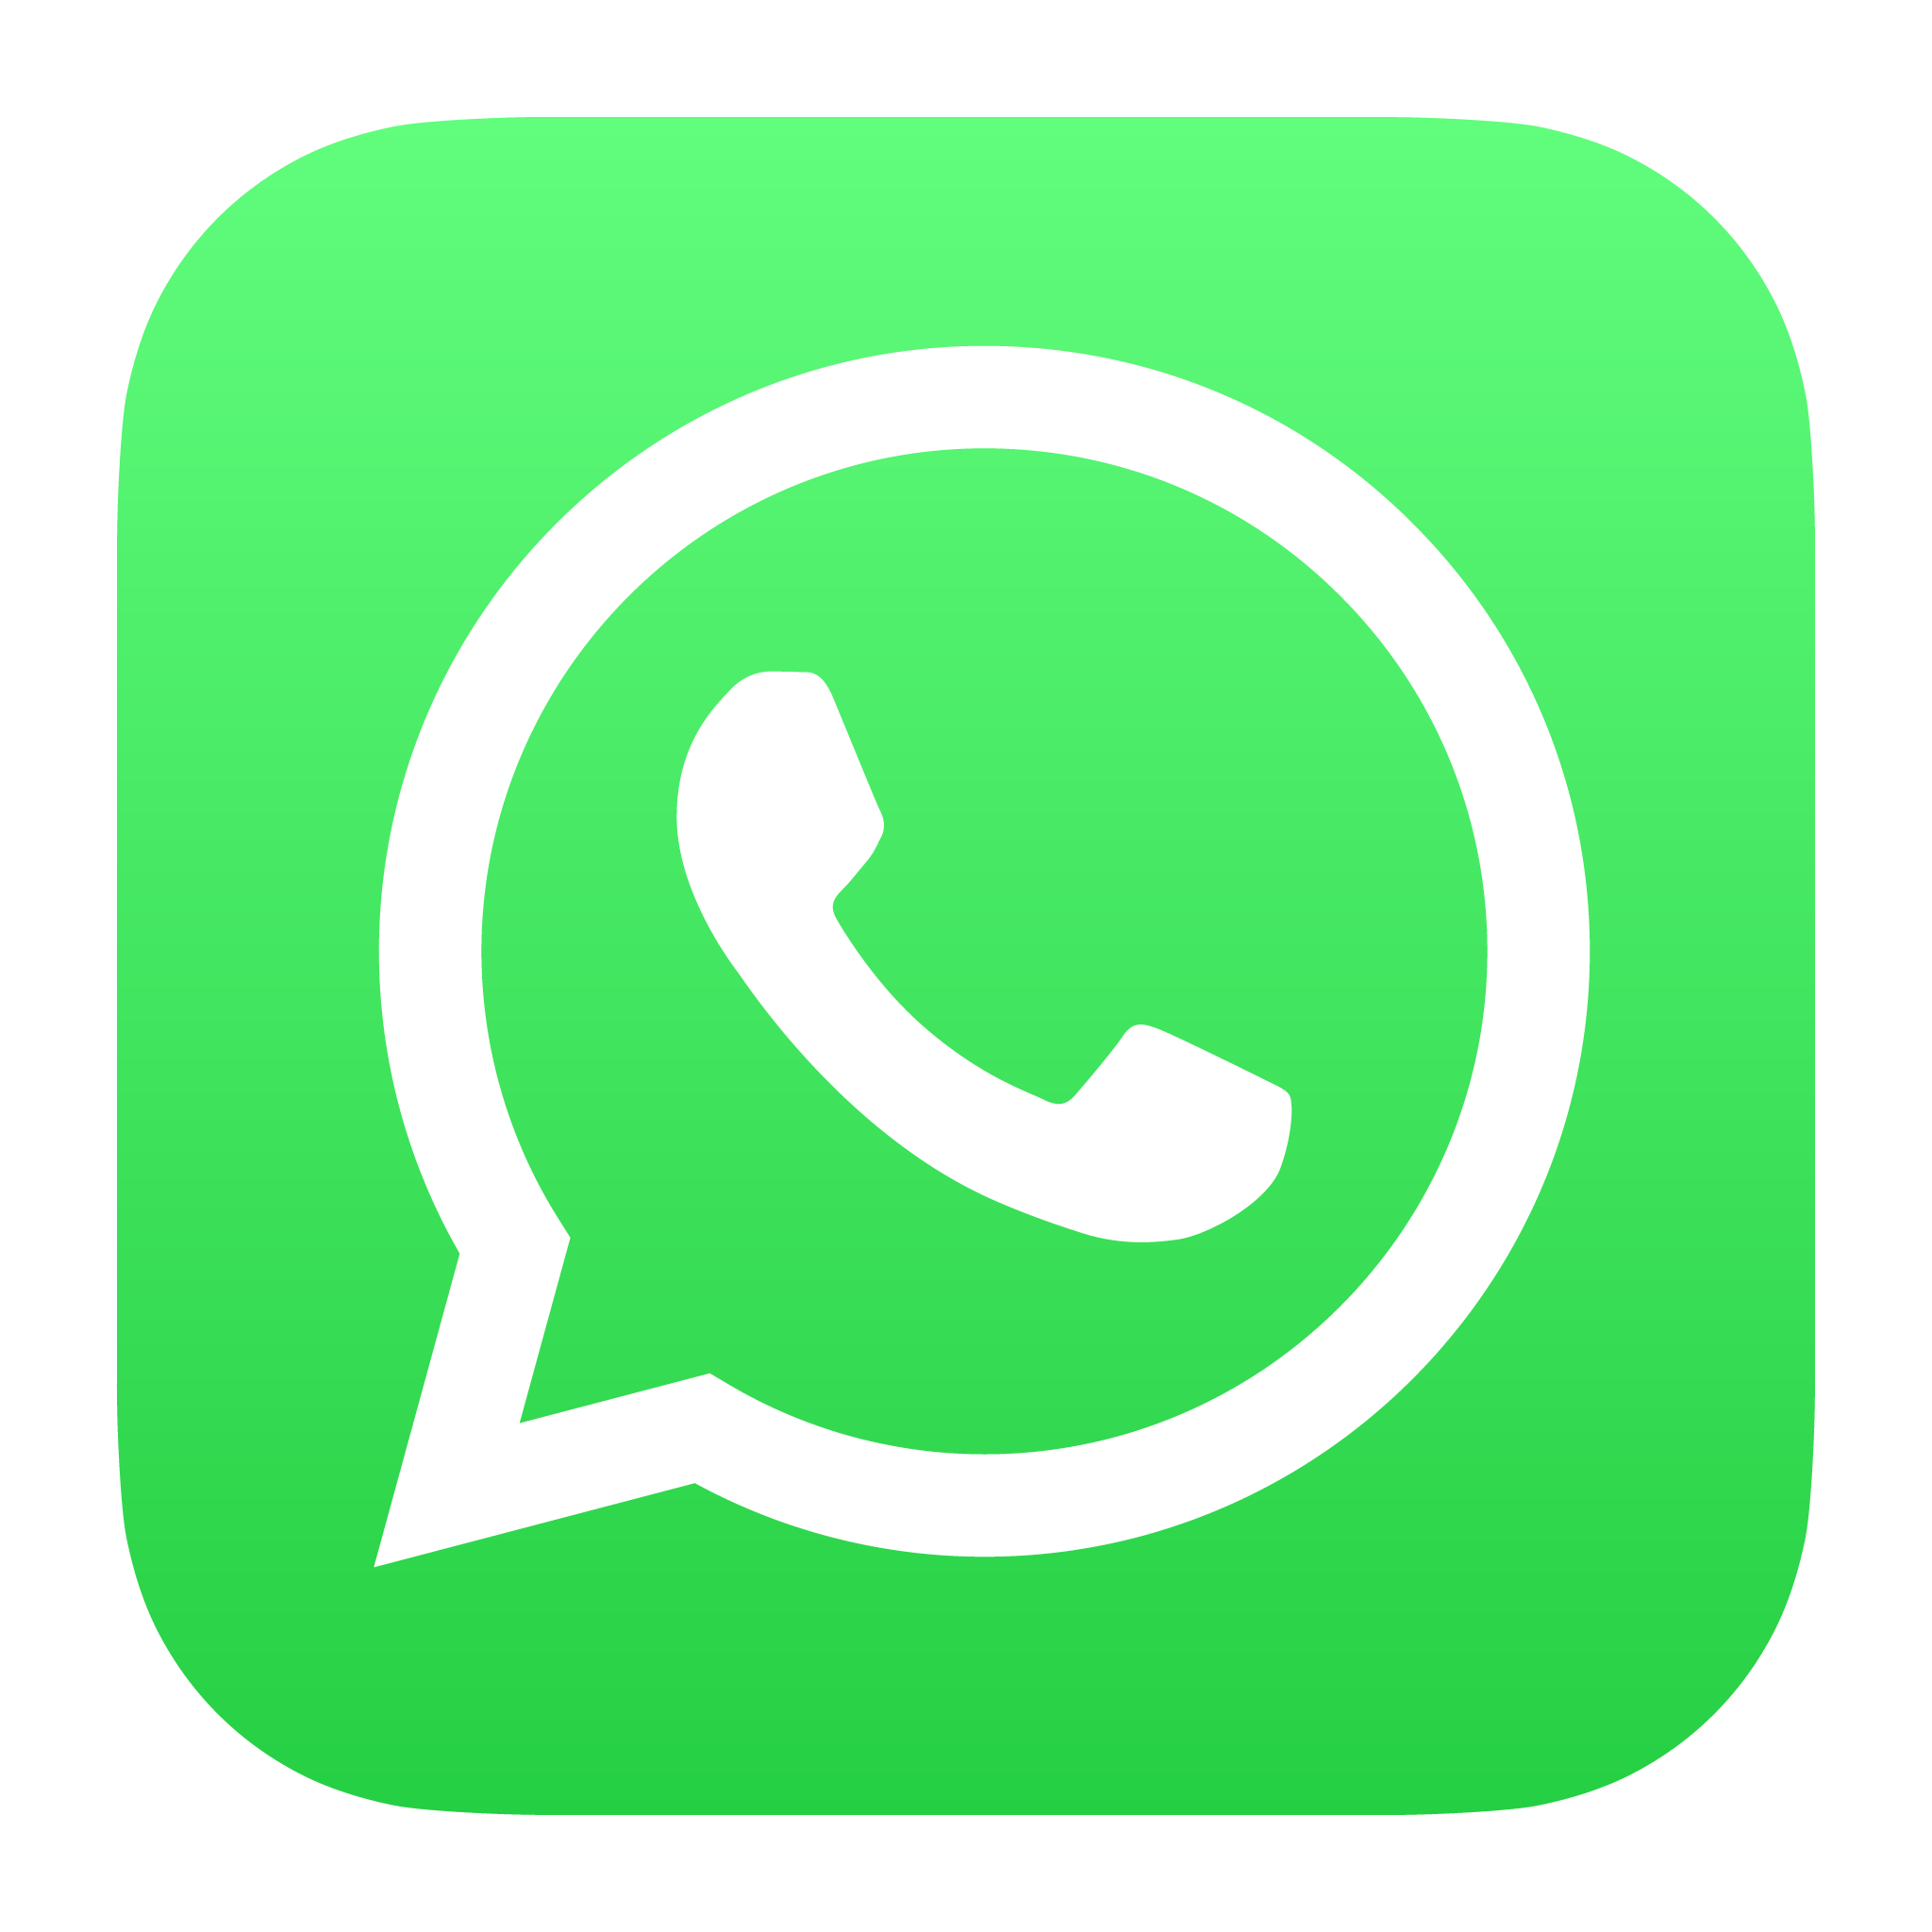 0 Result Images of Logo Whatsapp Png Transparente - PNG Image Collection